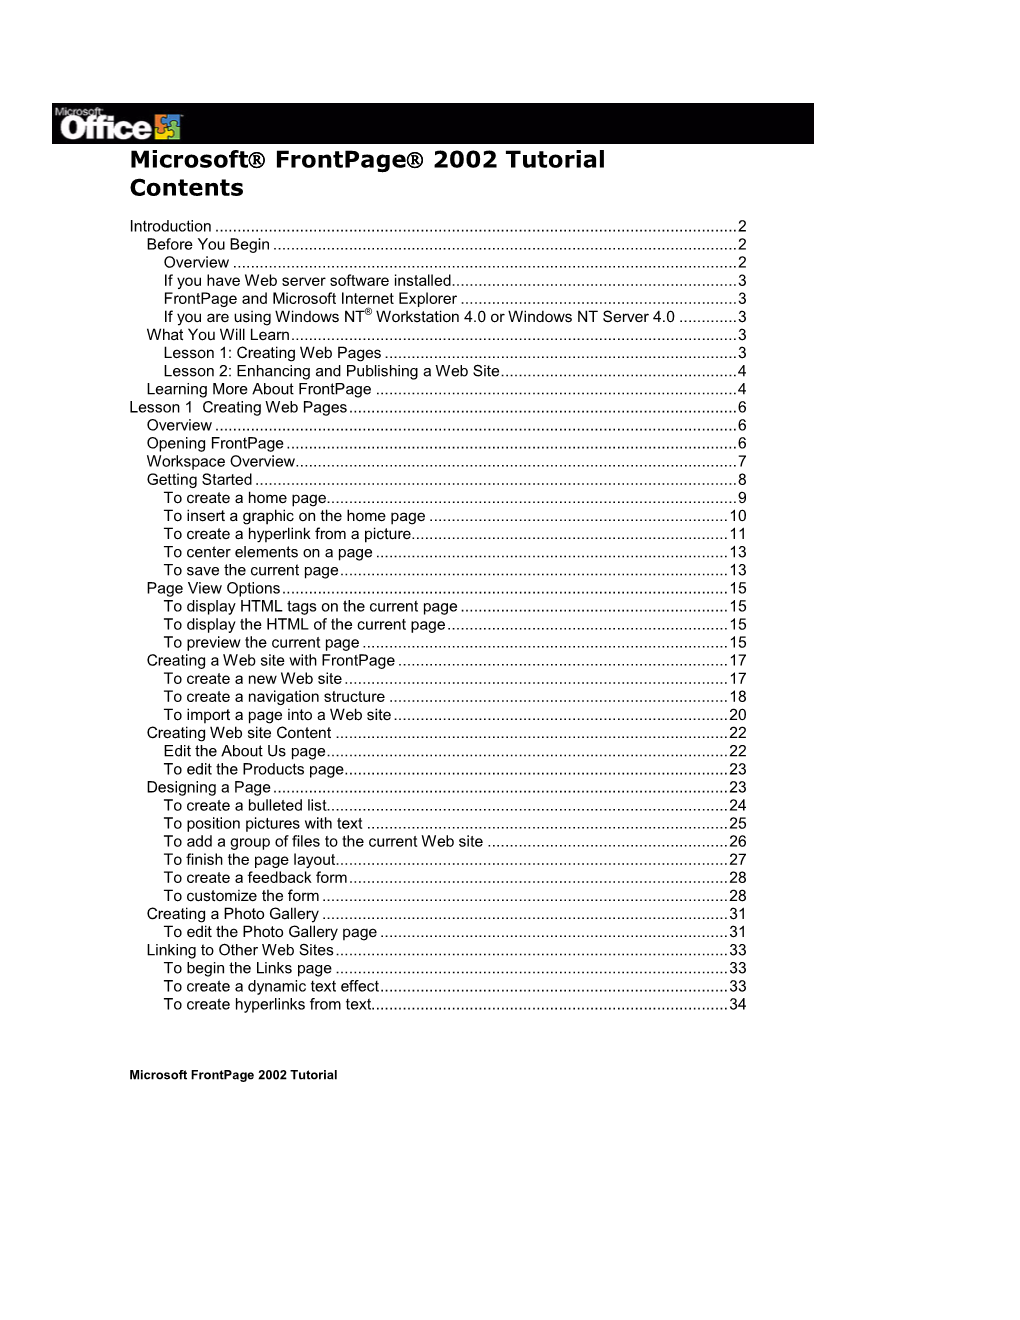 Microsoft® Frontpage® 2002 Tutorial Contents